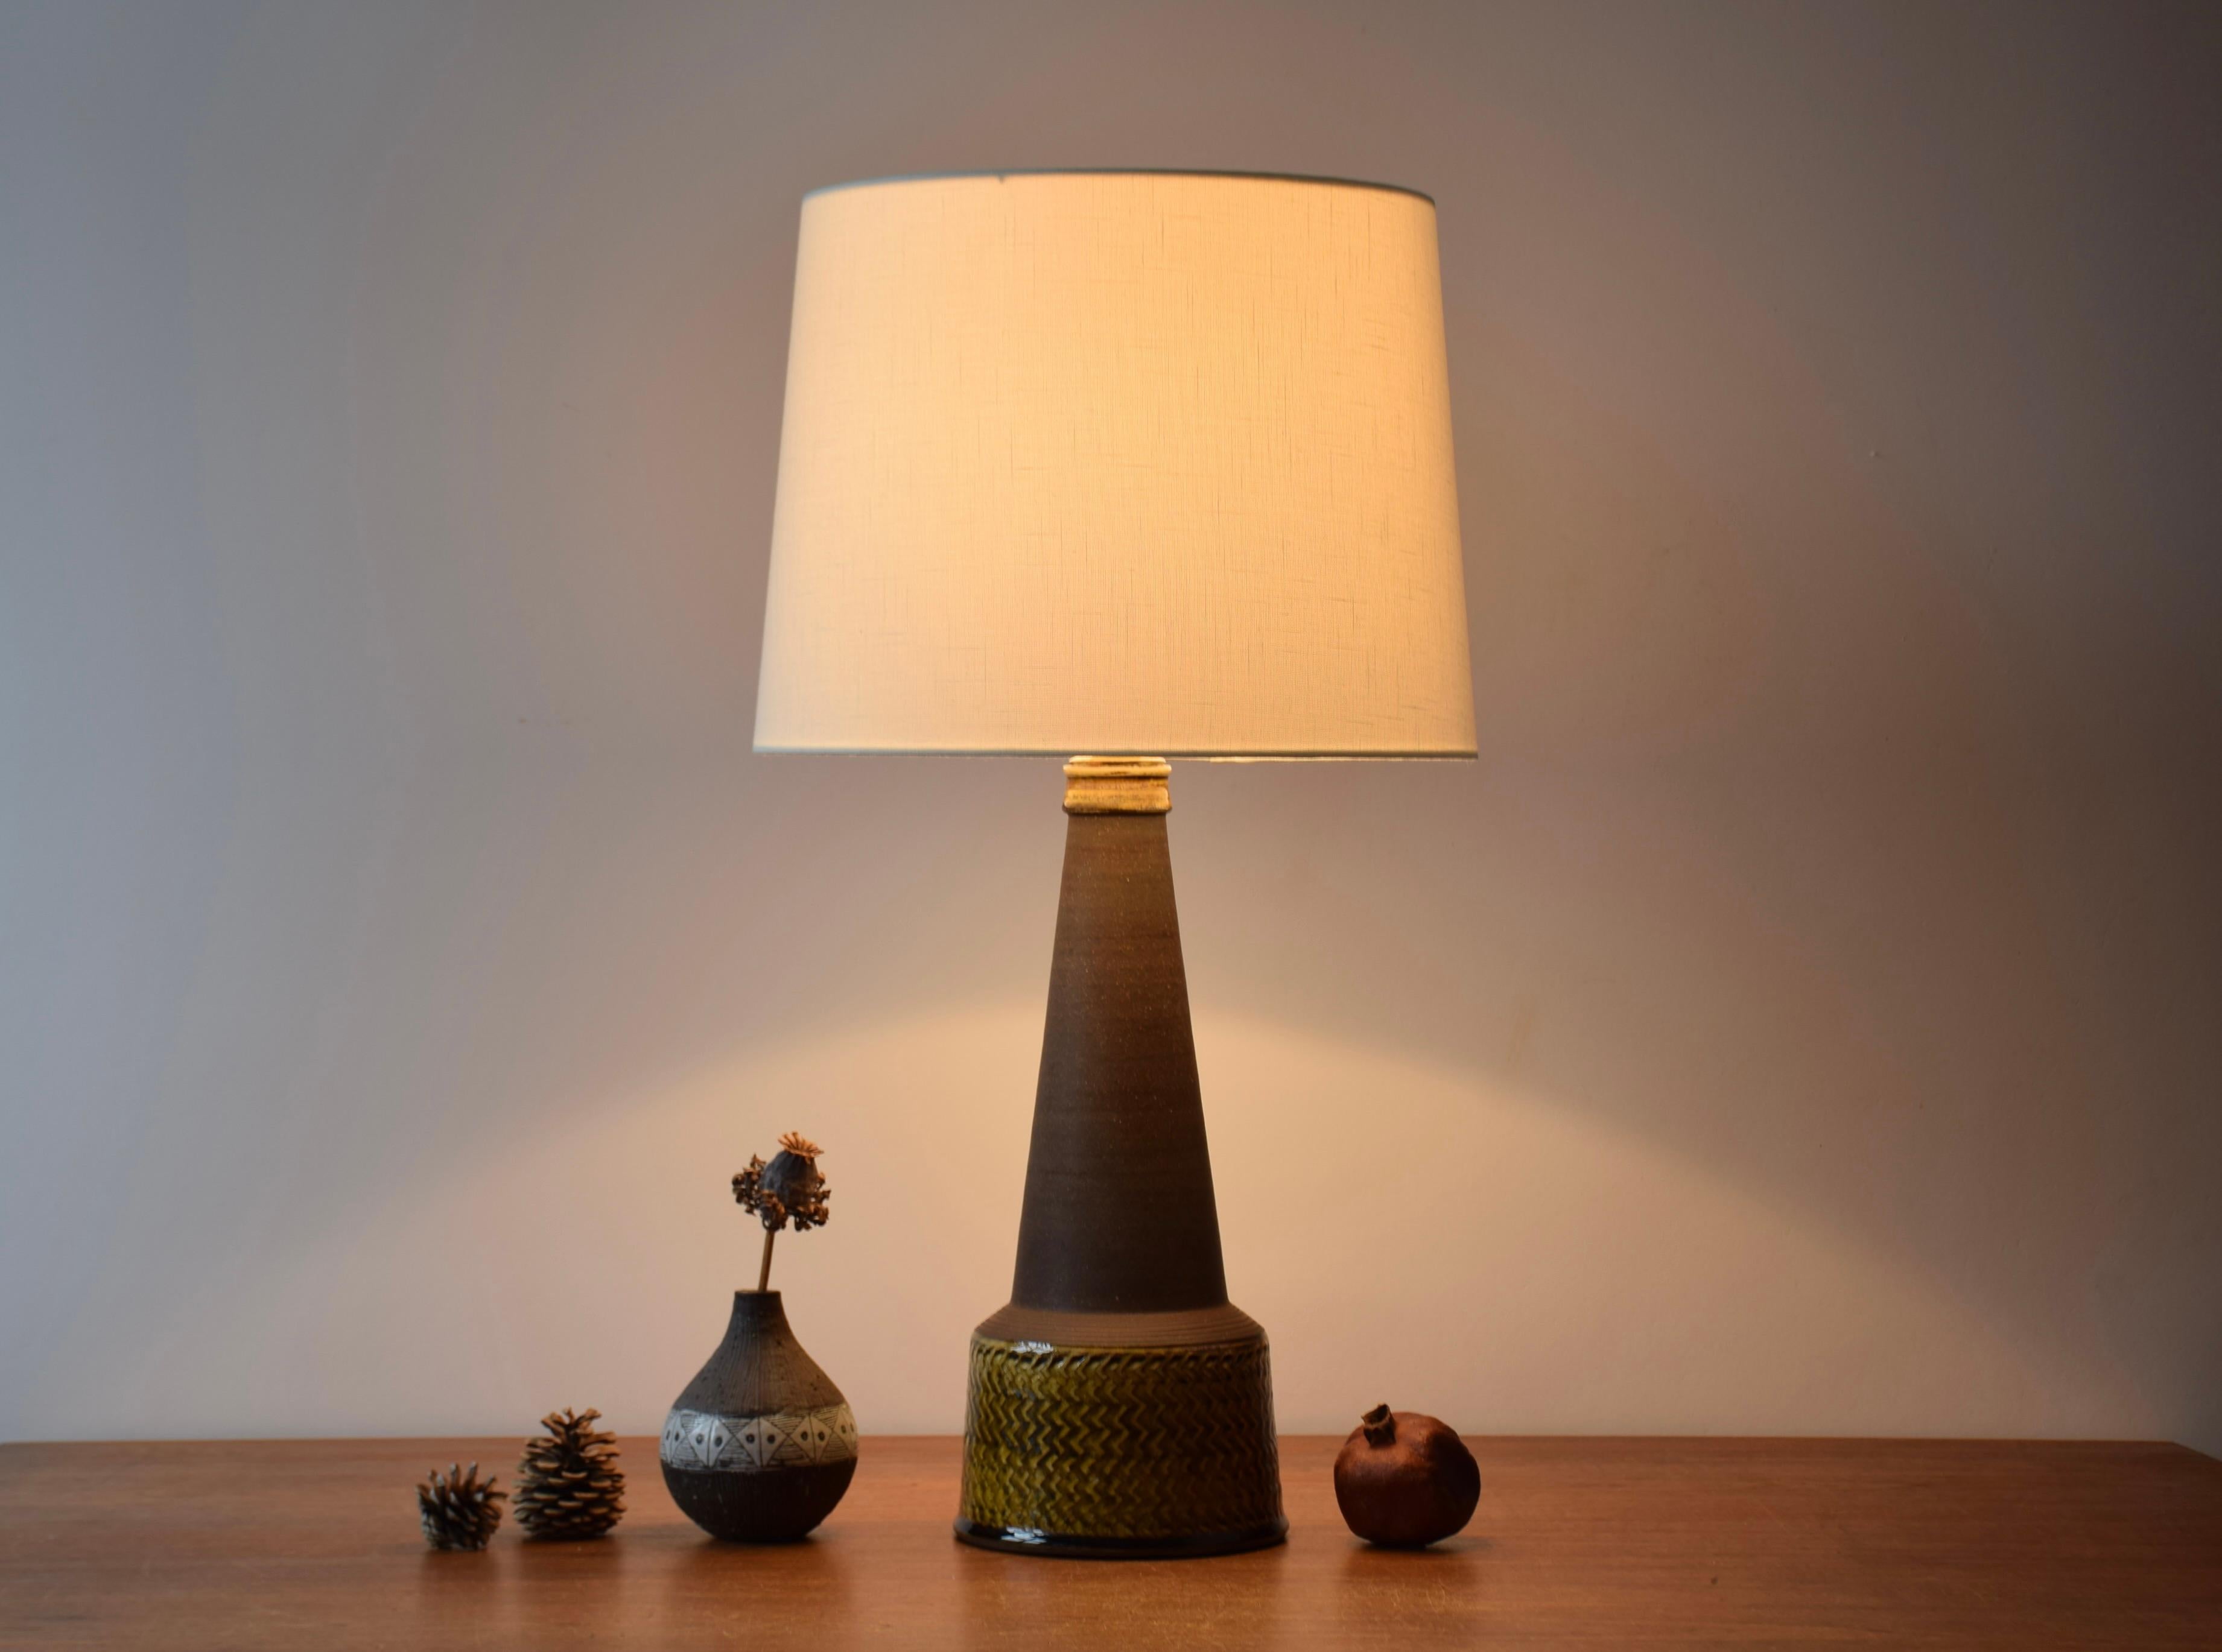 Tall table lamp by Nils Kähler from Herman August Kähler's ceramic workshop in Denmark. Made ca 1960s. 

The lamp base has an incised pattern and the glossy glaze is amber / curry colored. The neck and the shoulders are left smooth and without